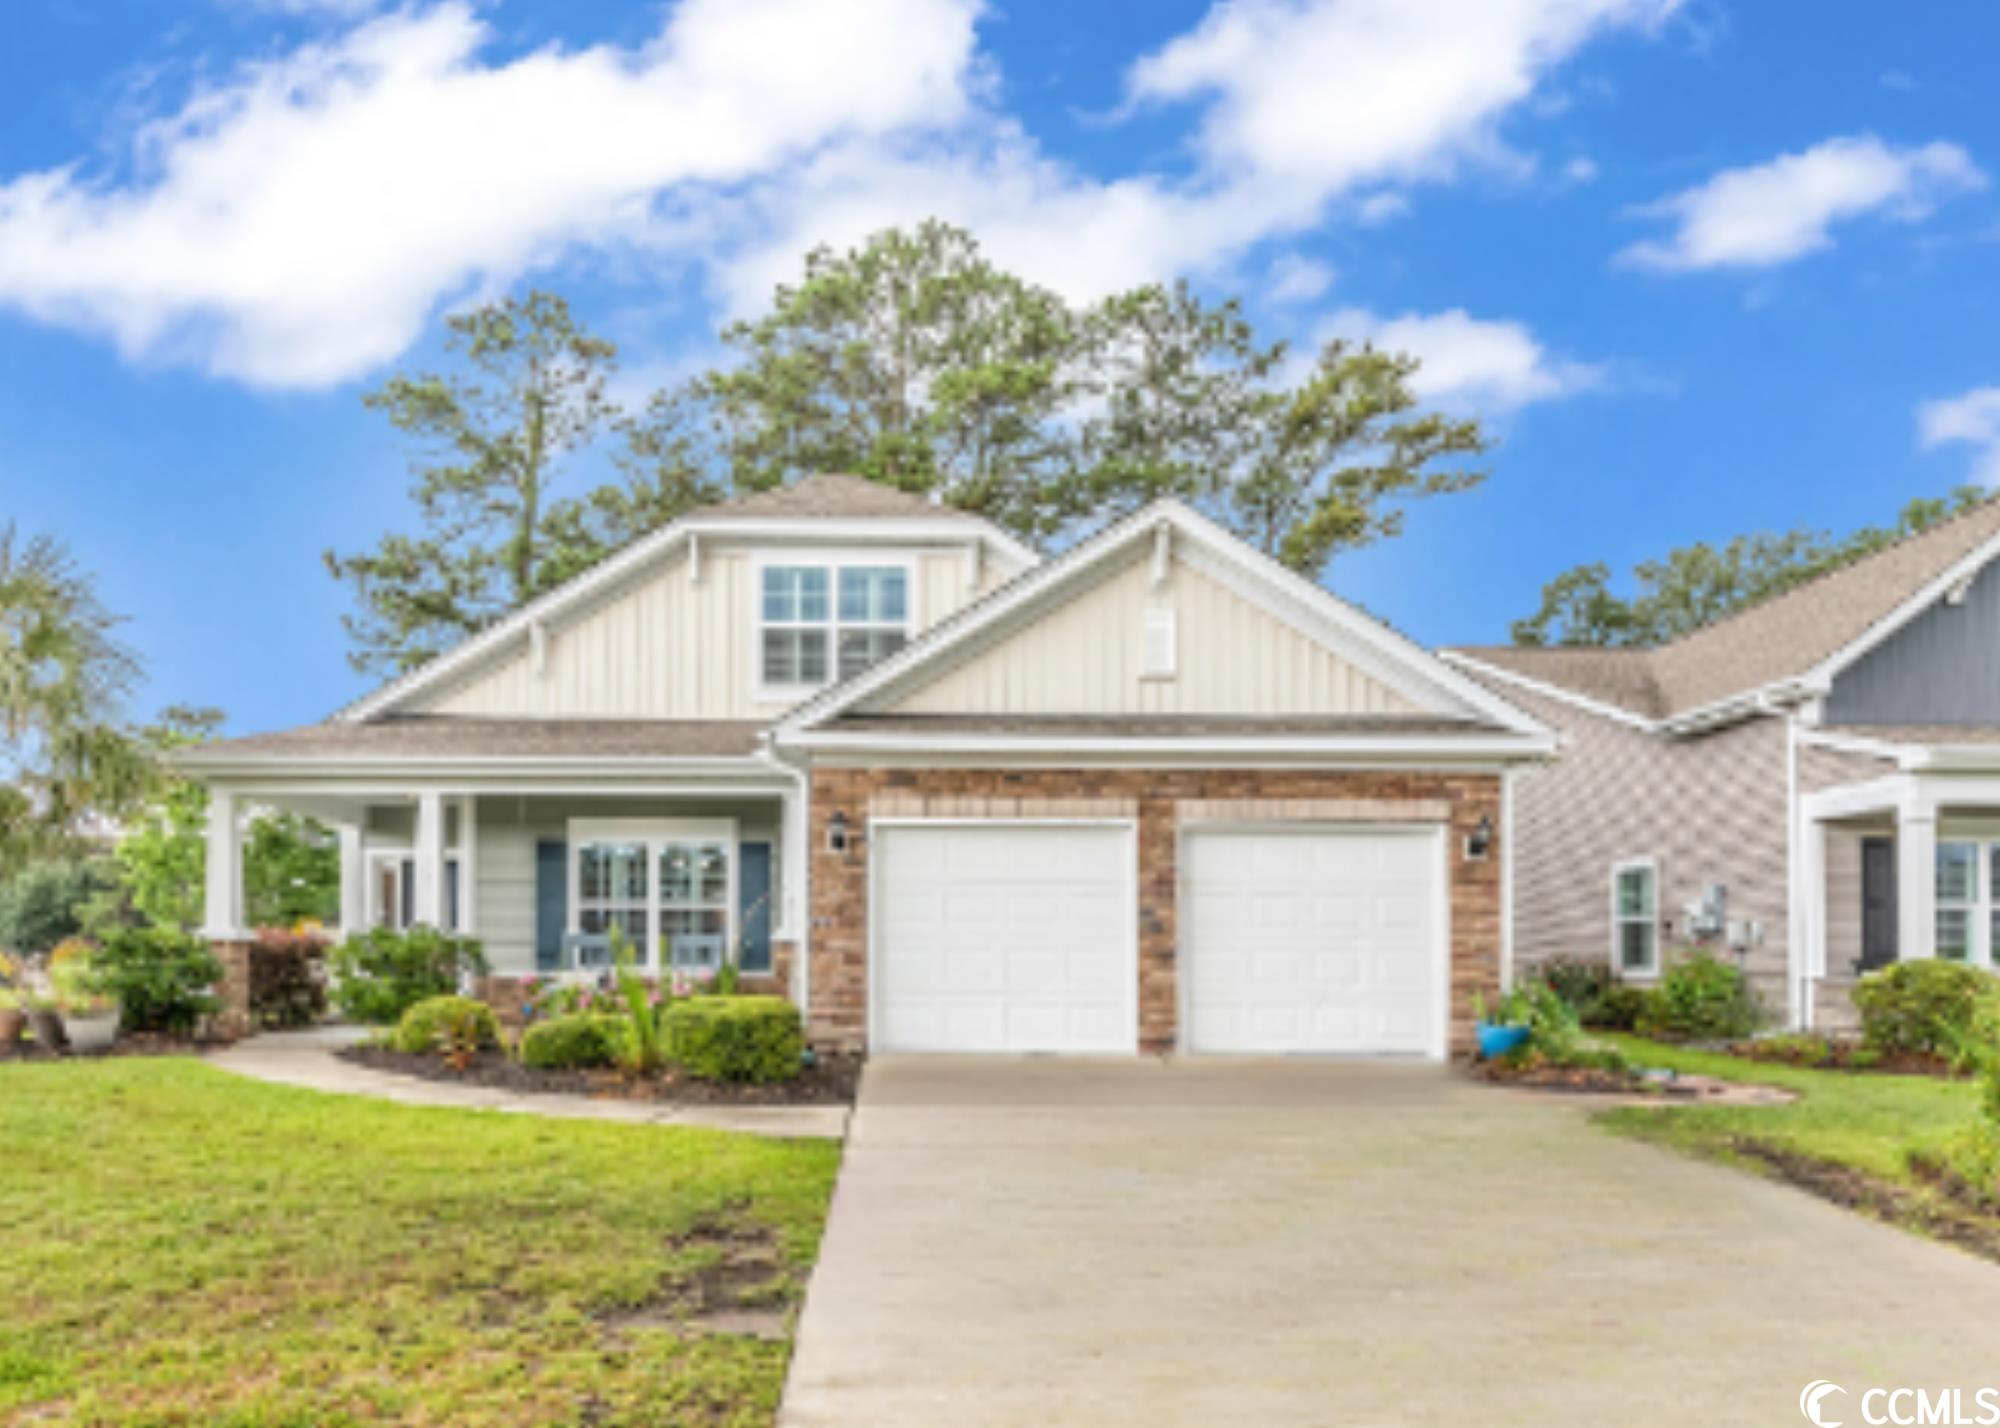 101 Zostera Dr. Little River, SC 29566